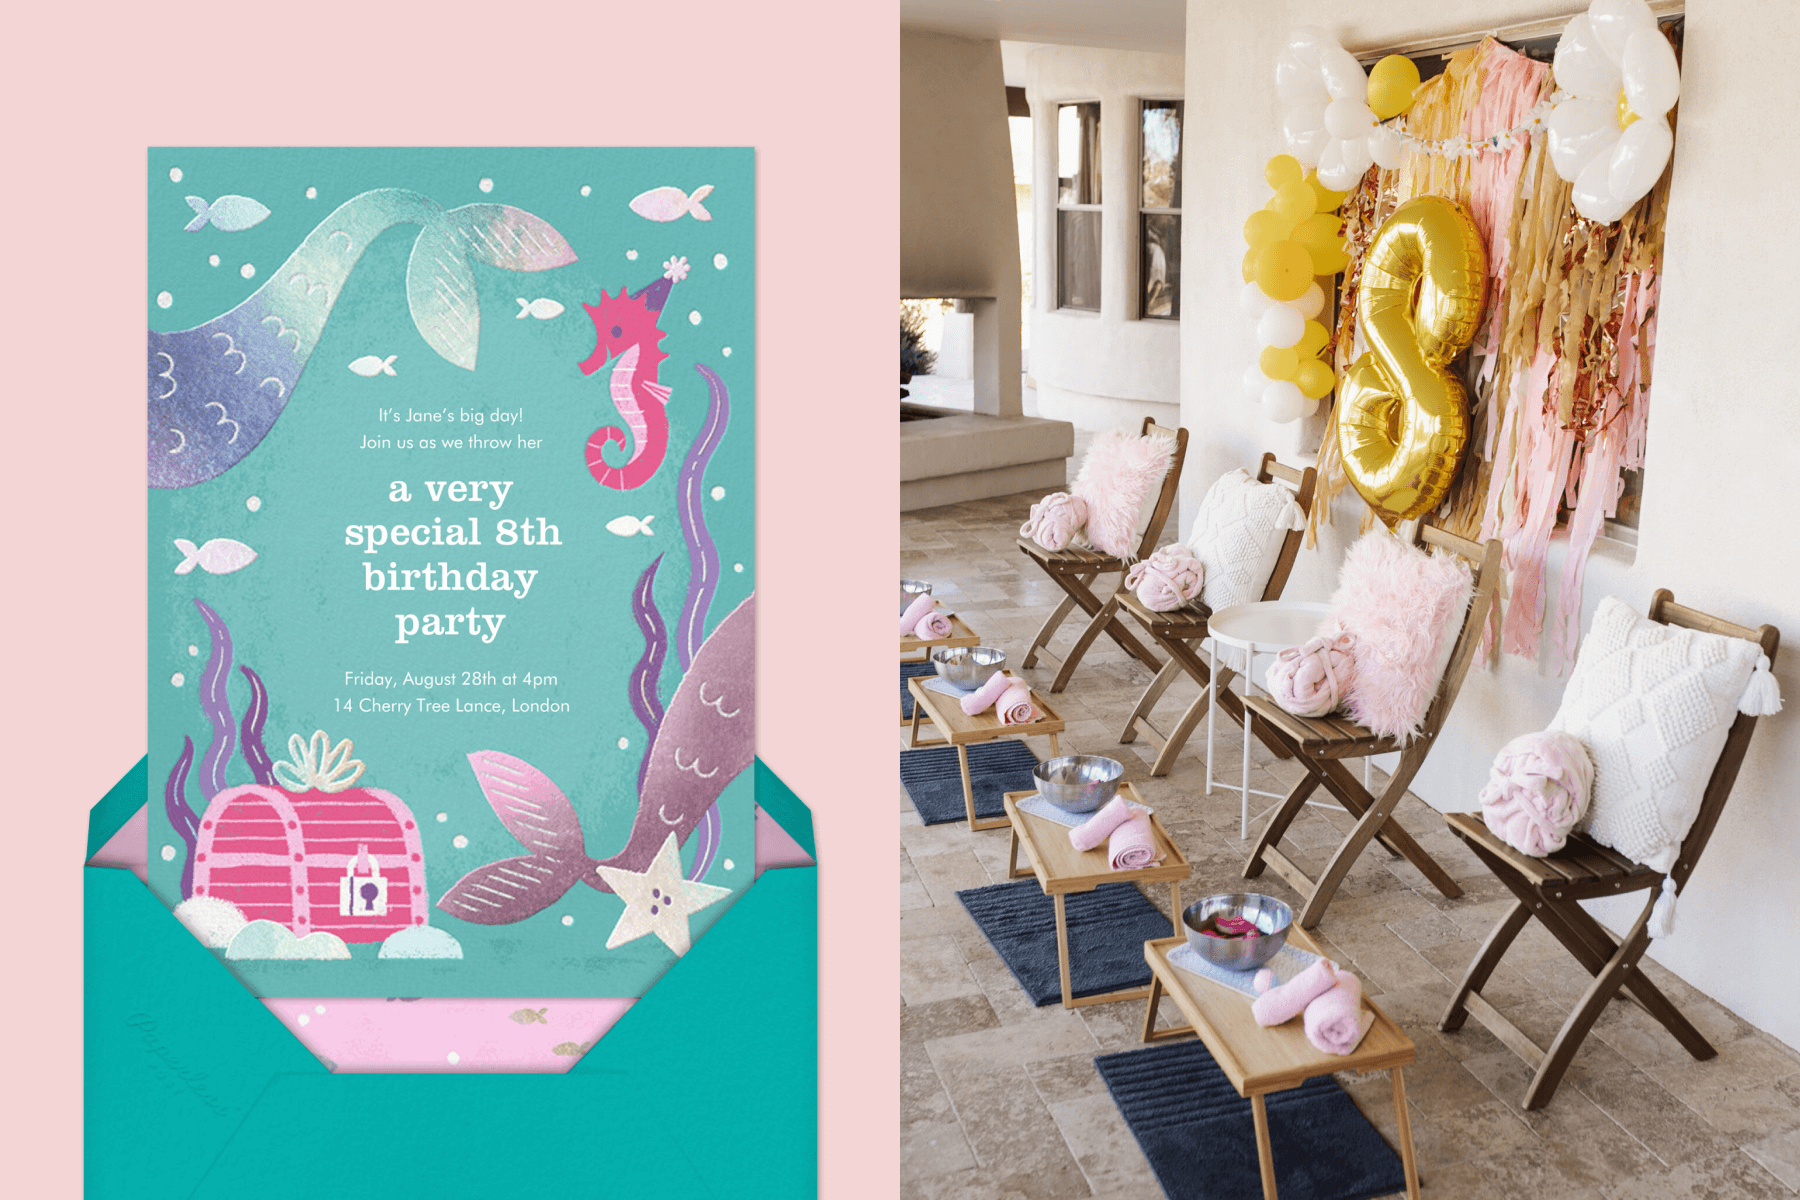 left: Birthday invitation with mermaid tails and seahorse illustrations. Right: Pedicure stations set up at someone’s home.